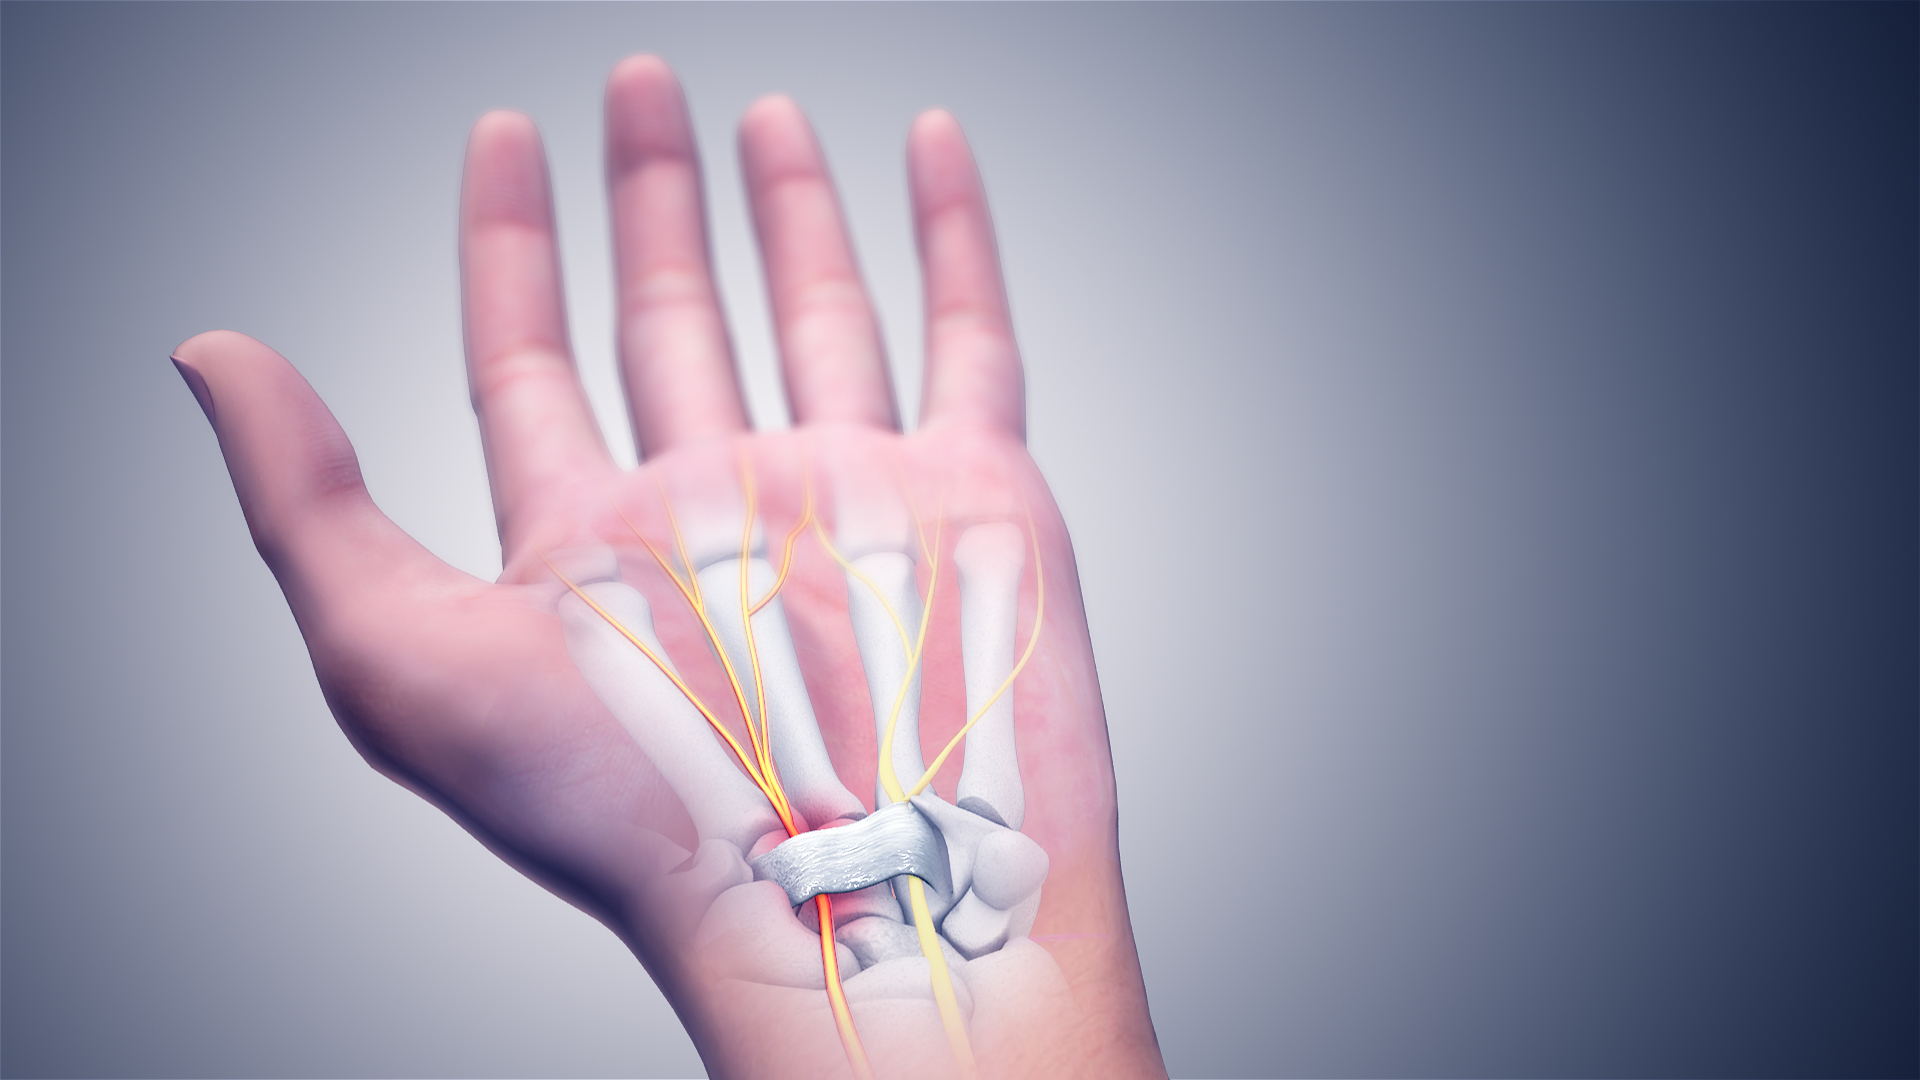 3D Medical Animation still of Carpal Tunnel Syndrome at the carpal tunnel